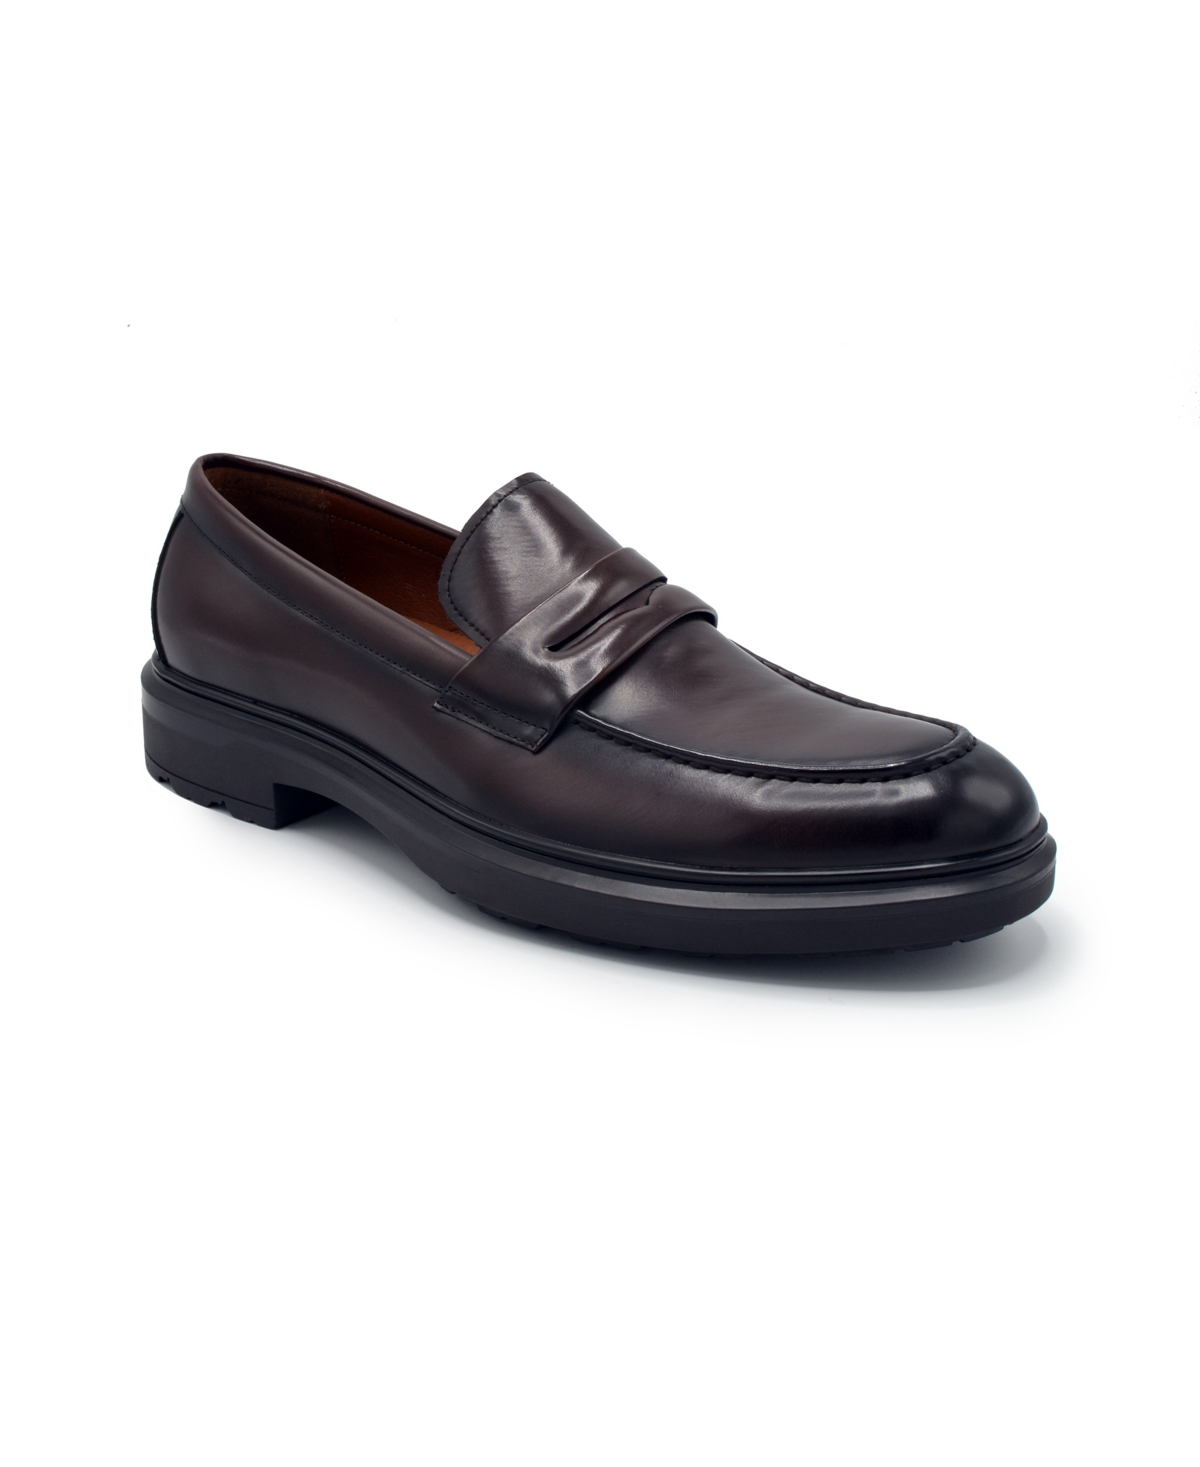 Aston Marc Men's Tuscan Penny Loafer Dress Shoes In Brown